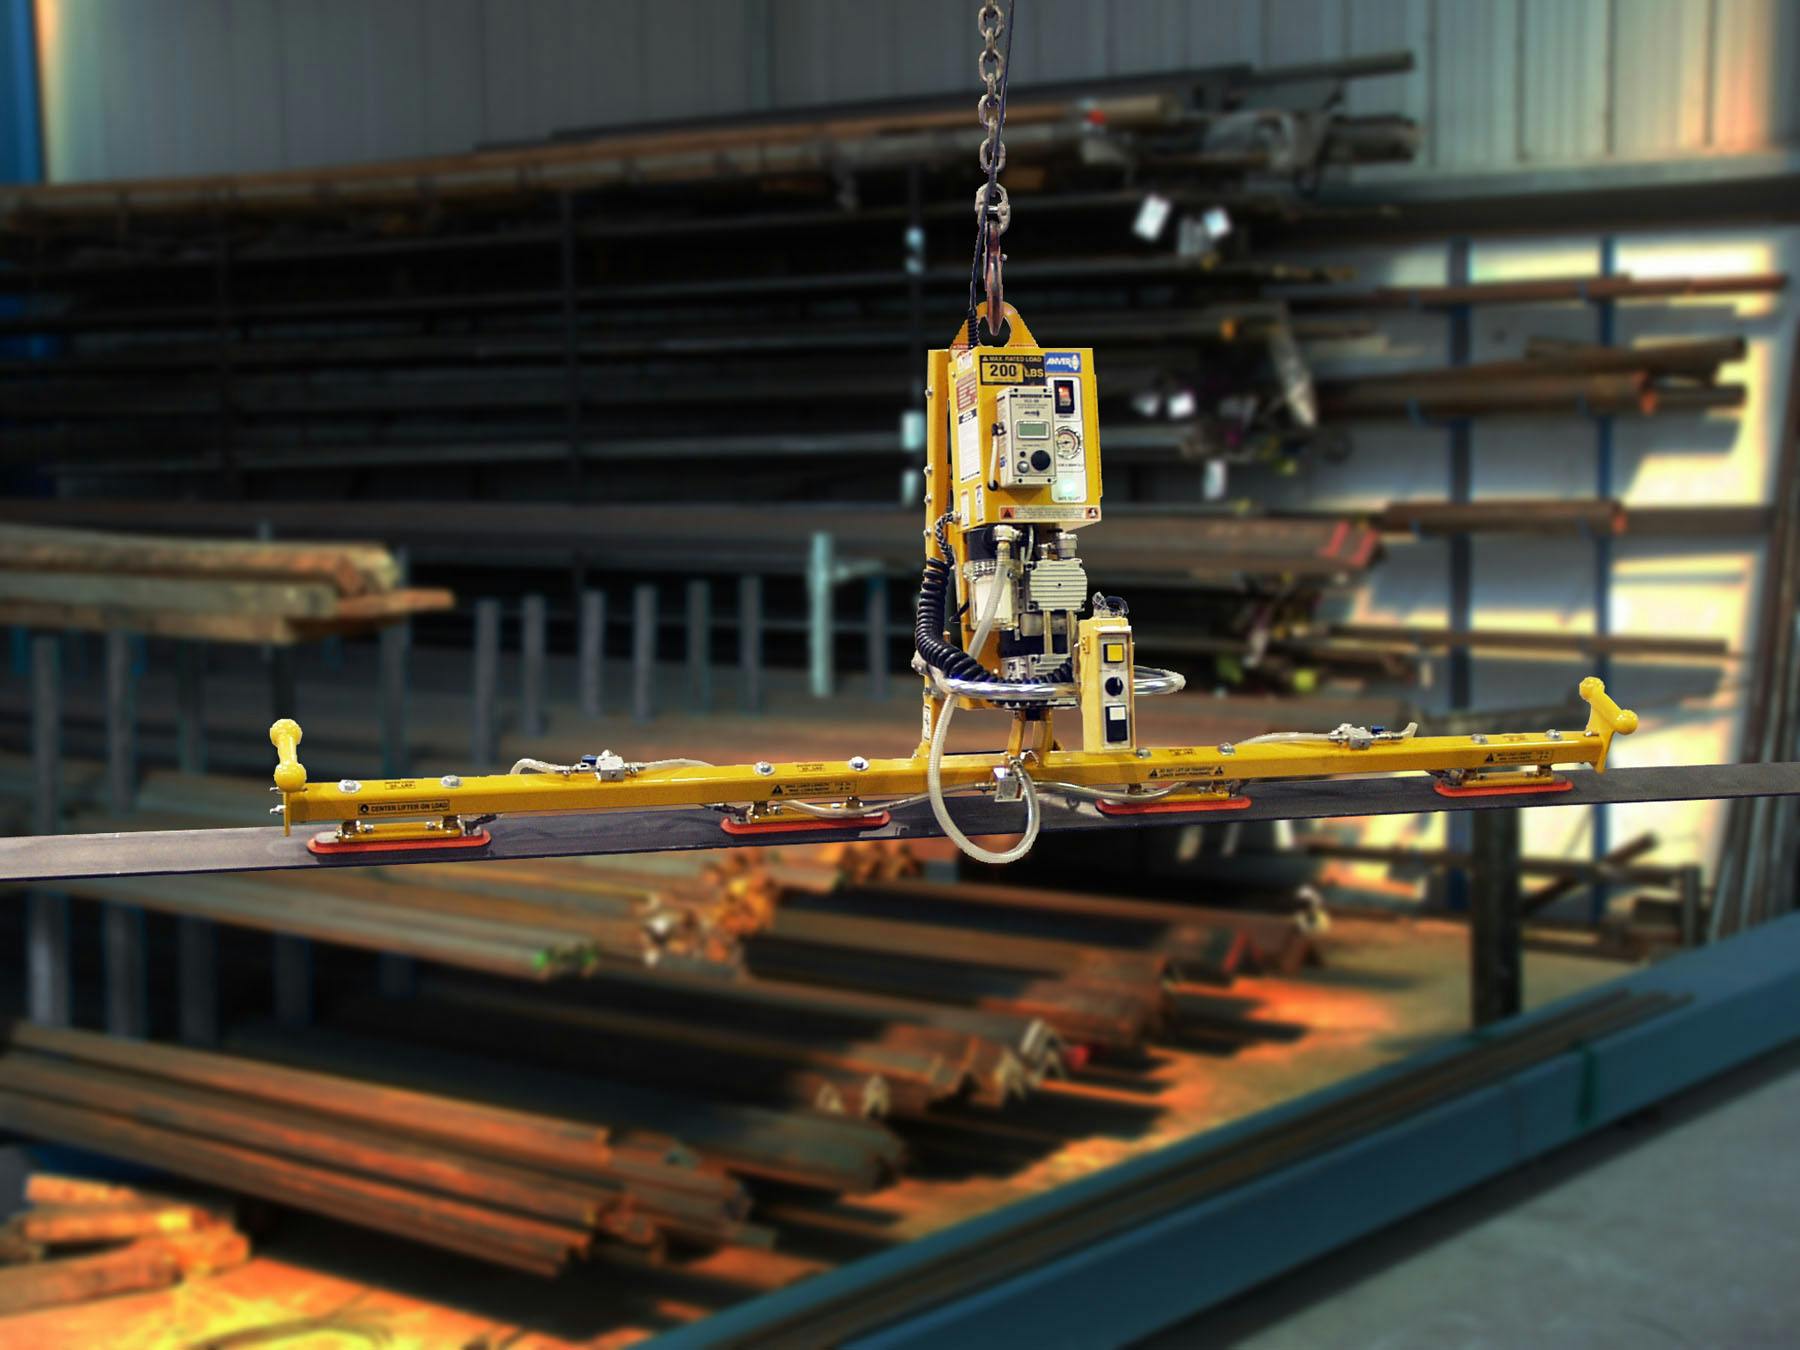 Anver Corp. Introduces ETL Series Vacuum Lifter 